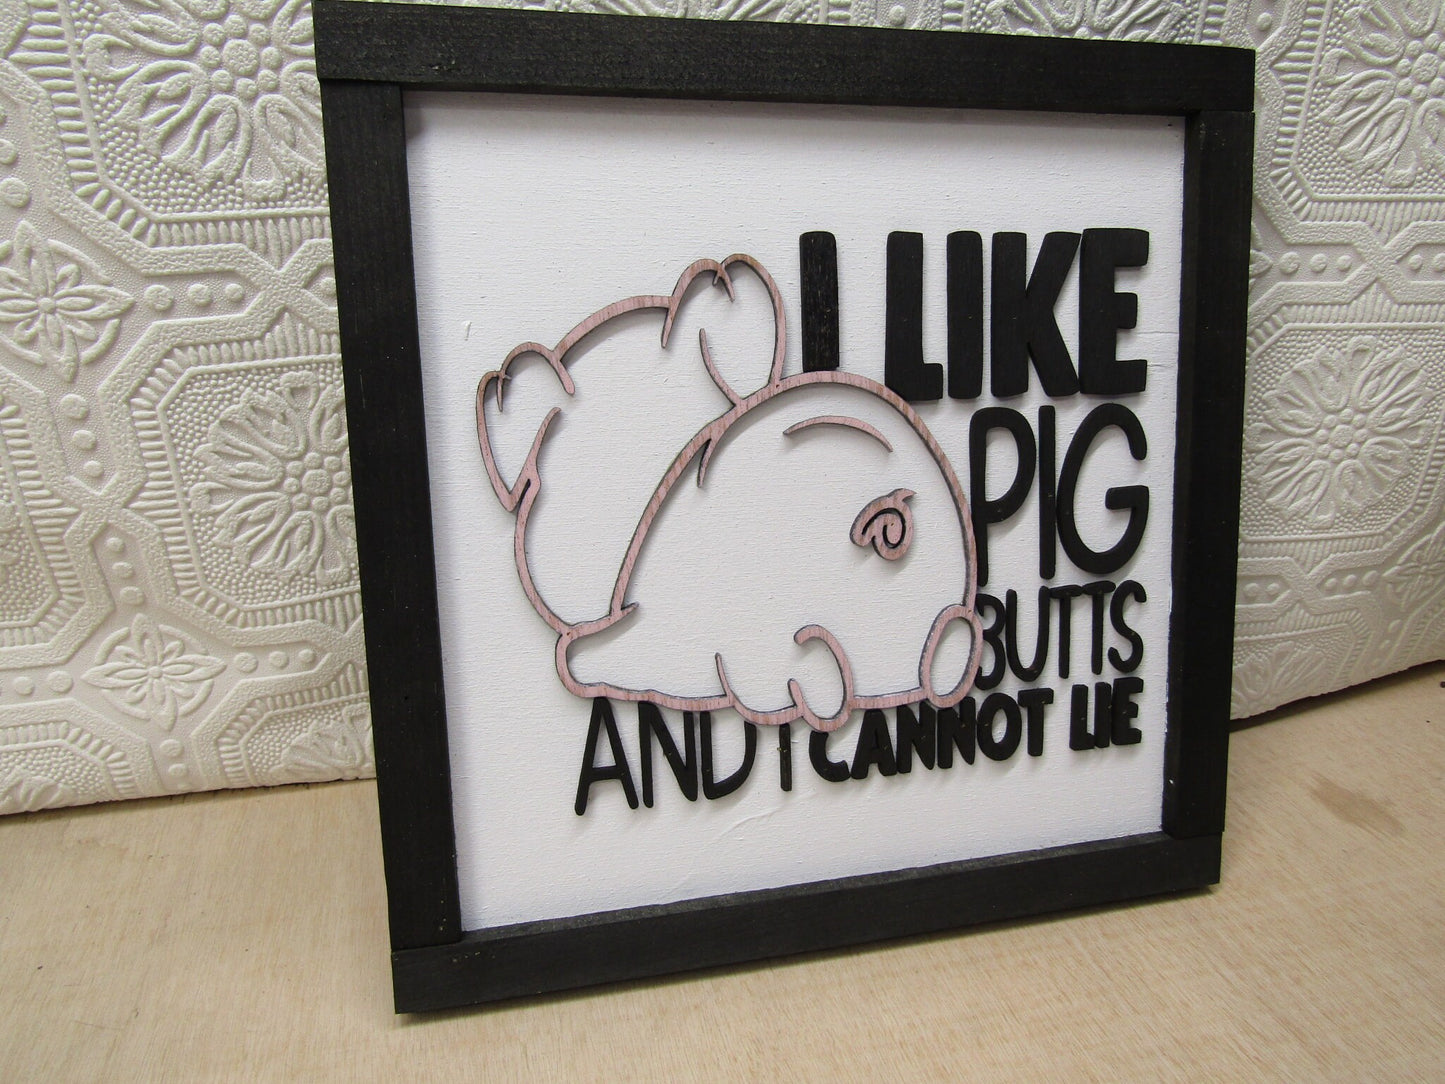 Wood Decor I like Pig Butts Piggie Farm Animal Lover Funny Cute Gift 3d Rustic Wall decor Raised Text Handmade Laser Cut Rustic I Cannot Lie